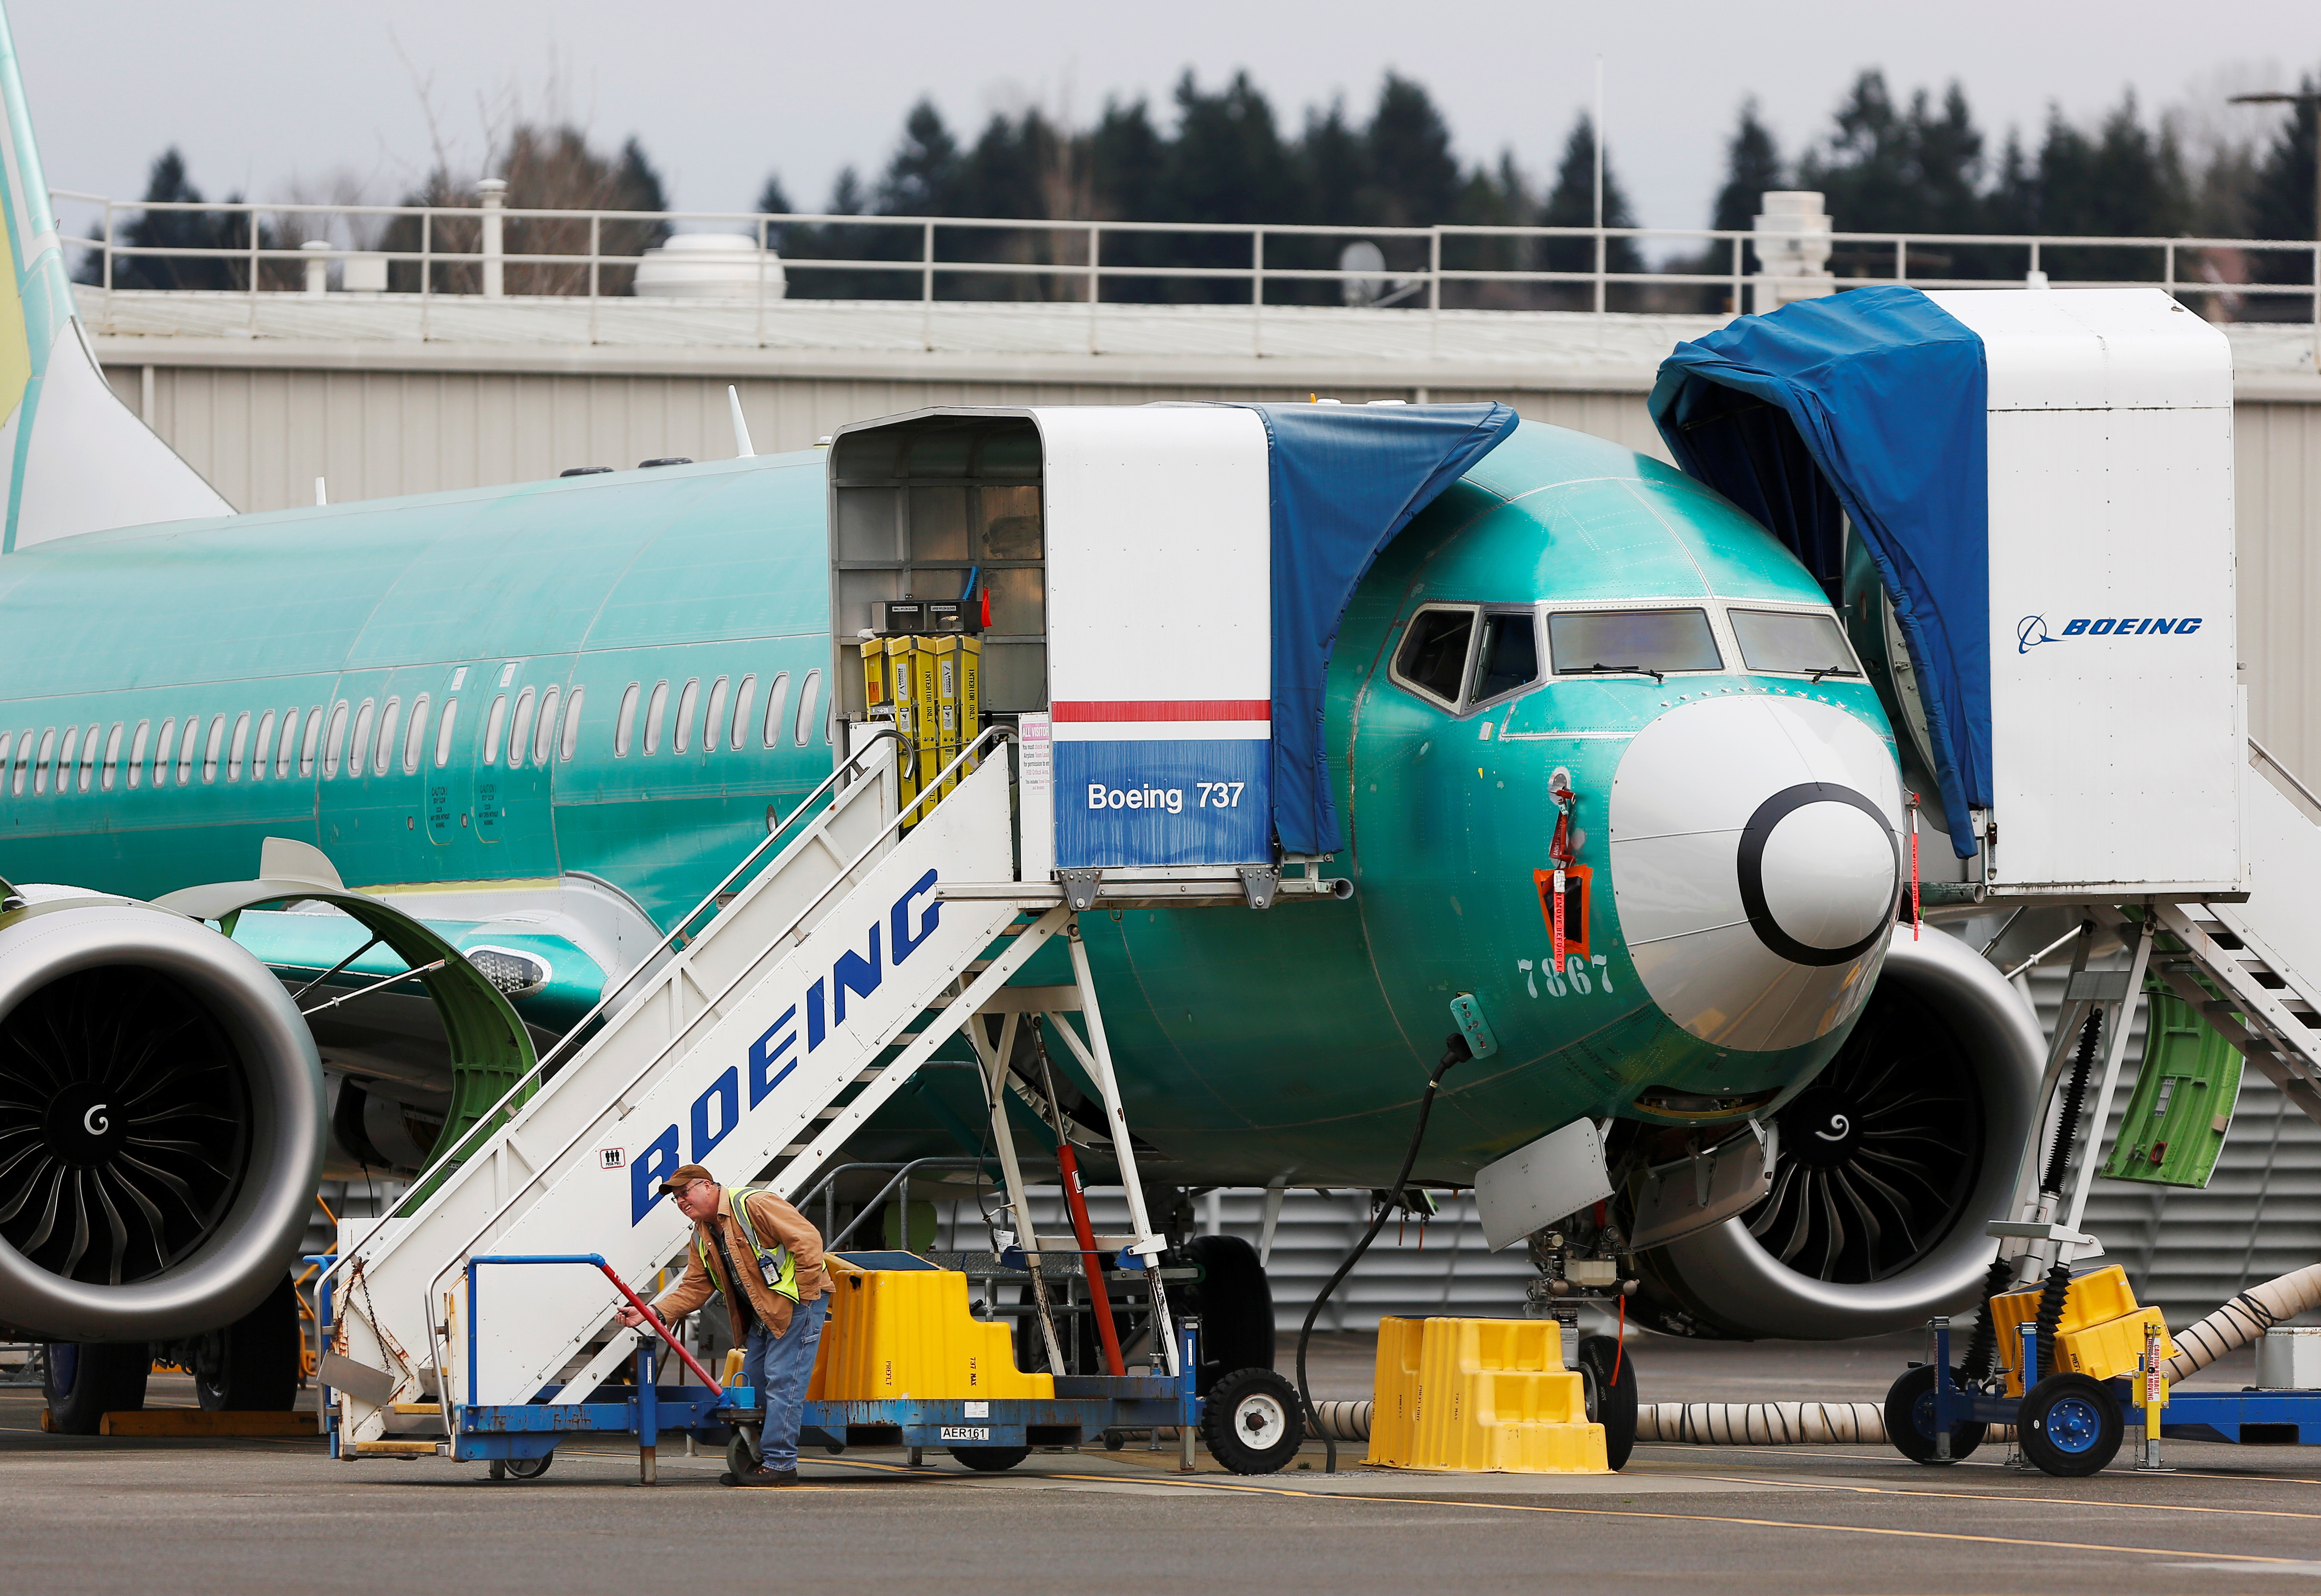 An employee works near a Boeing 737 Max aircraft at Boeing's 737 Max production facility in Renton